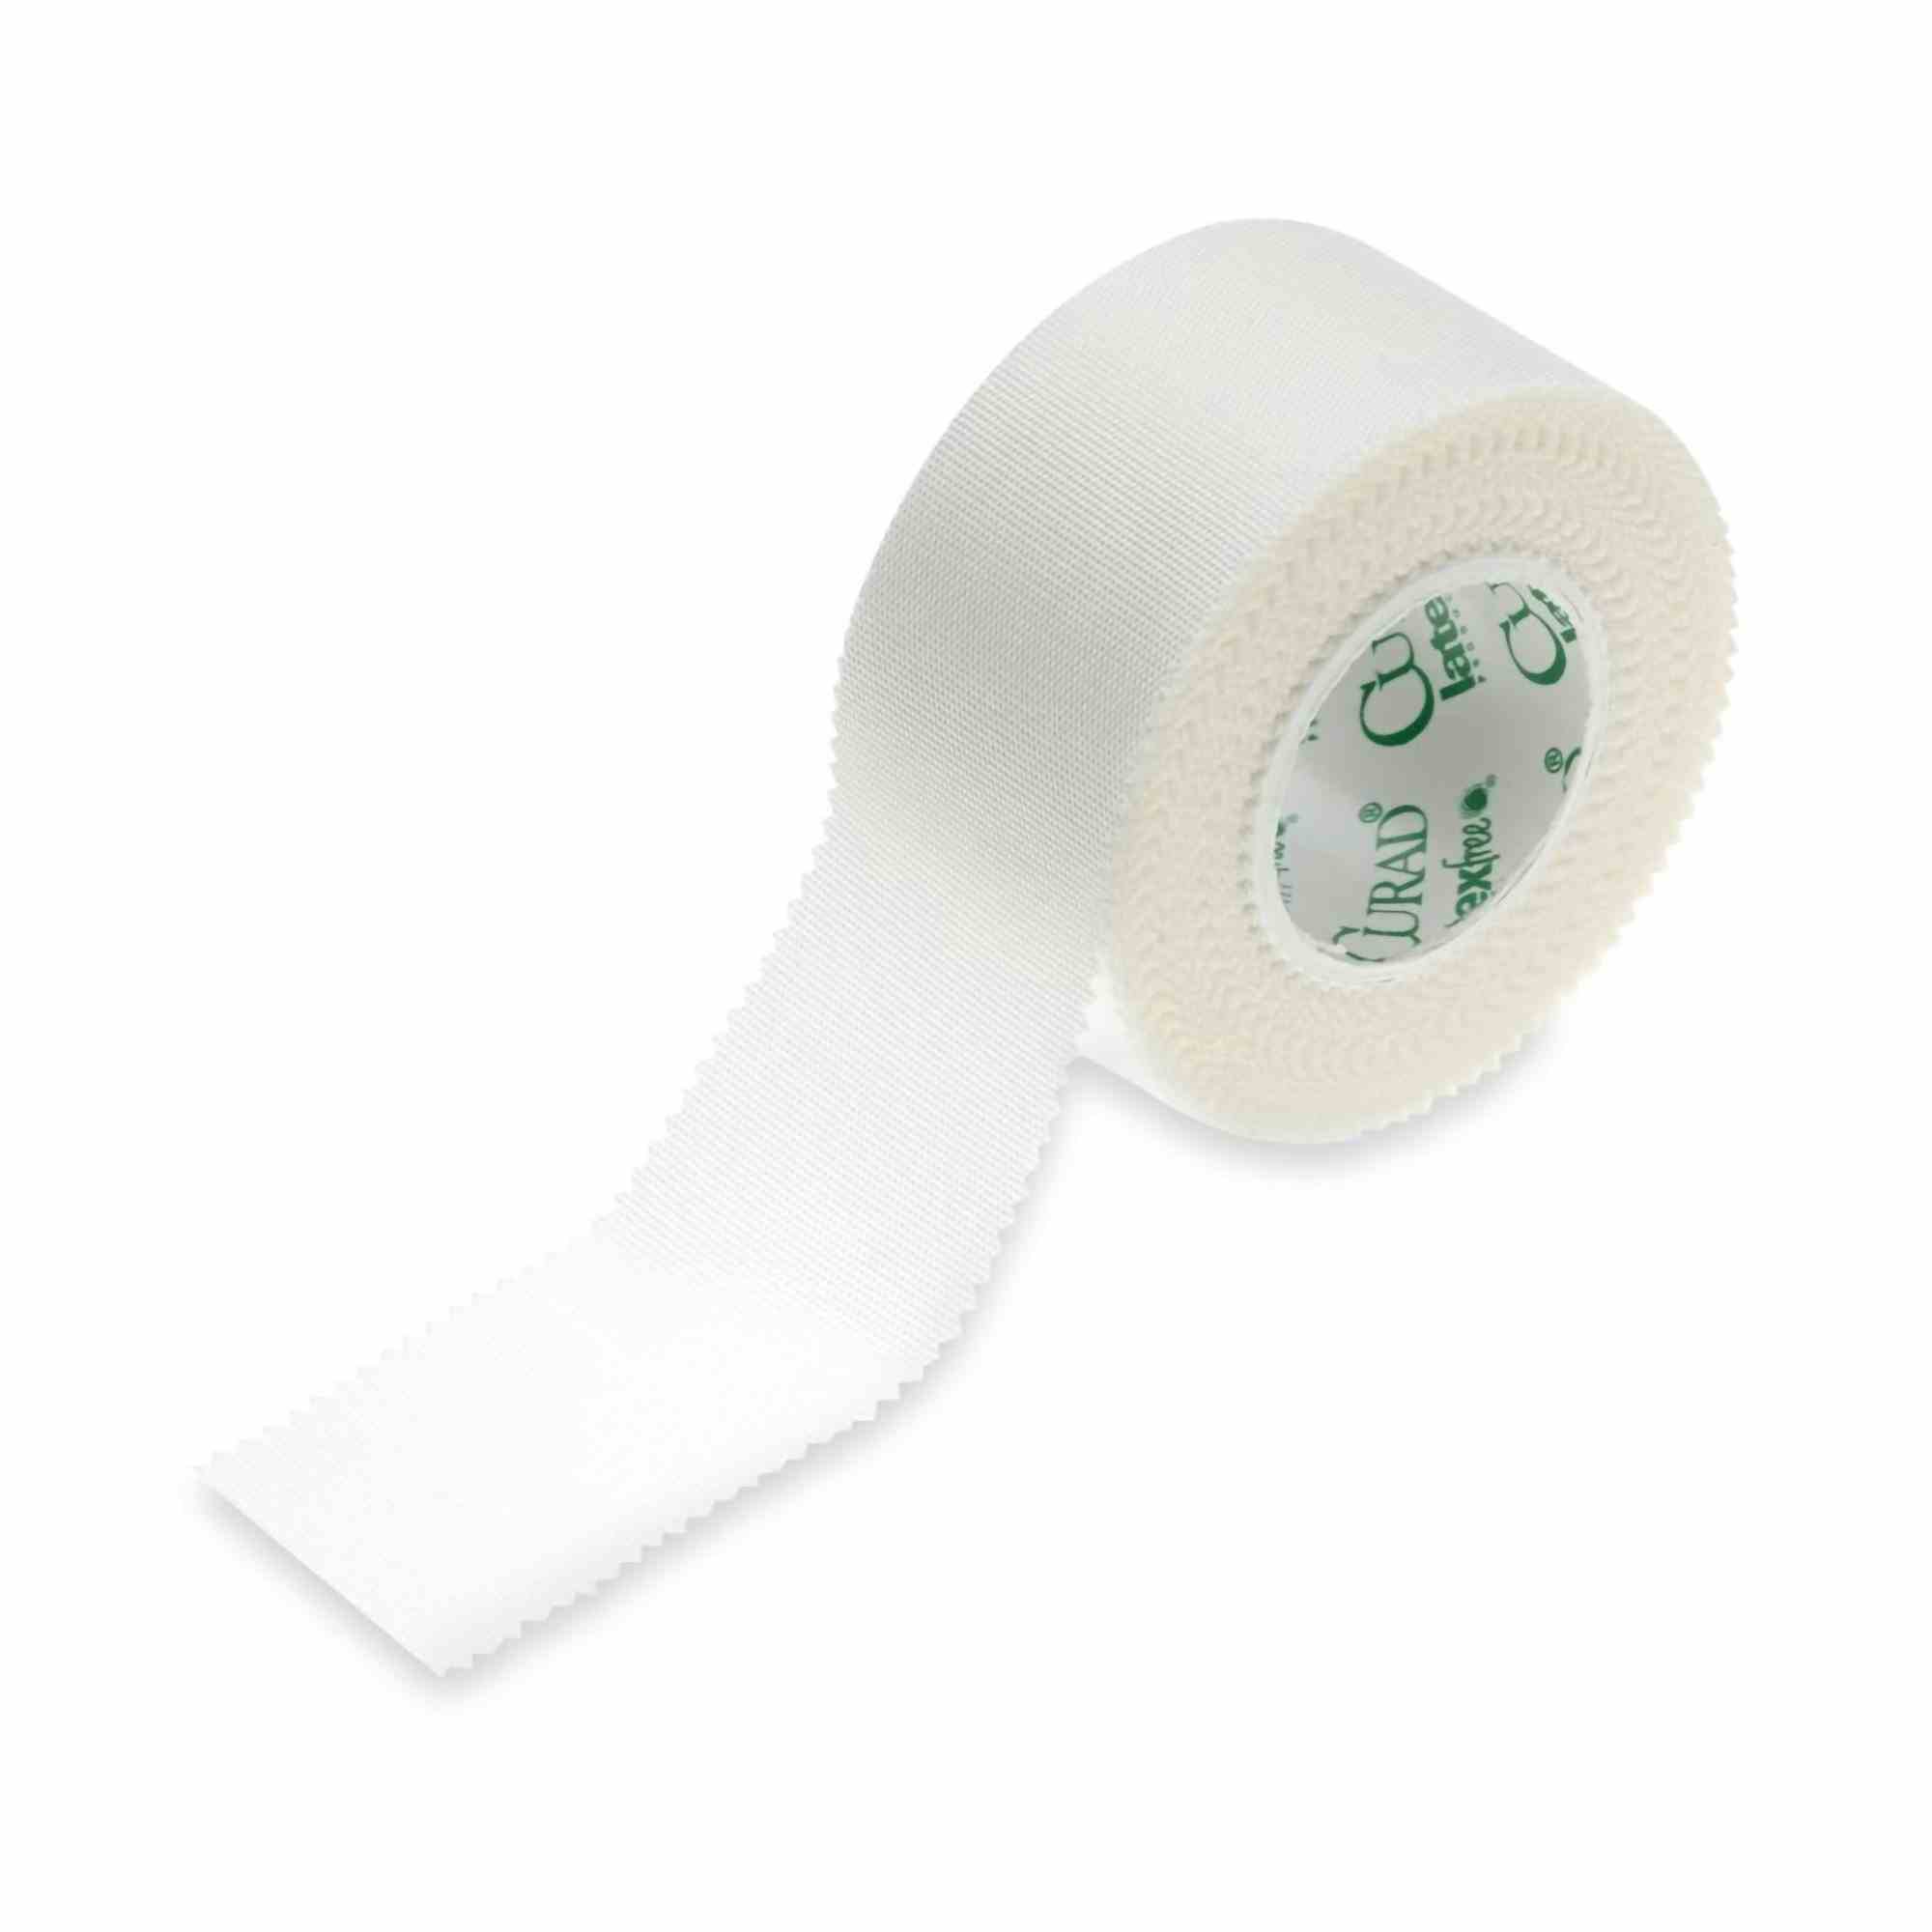 Curad Water Resistant Silk-Like Cloth Medical Tape, 1" X 10 yd, NON270101, Box of 12